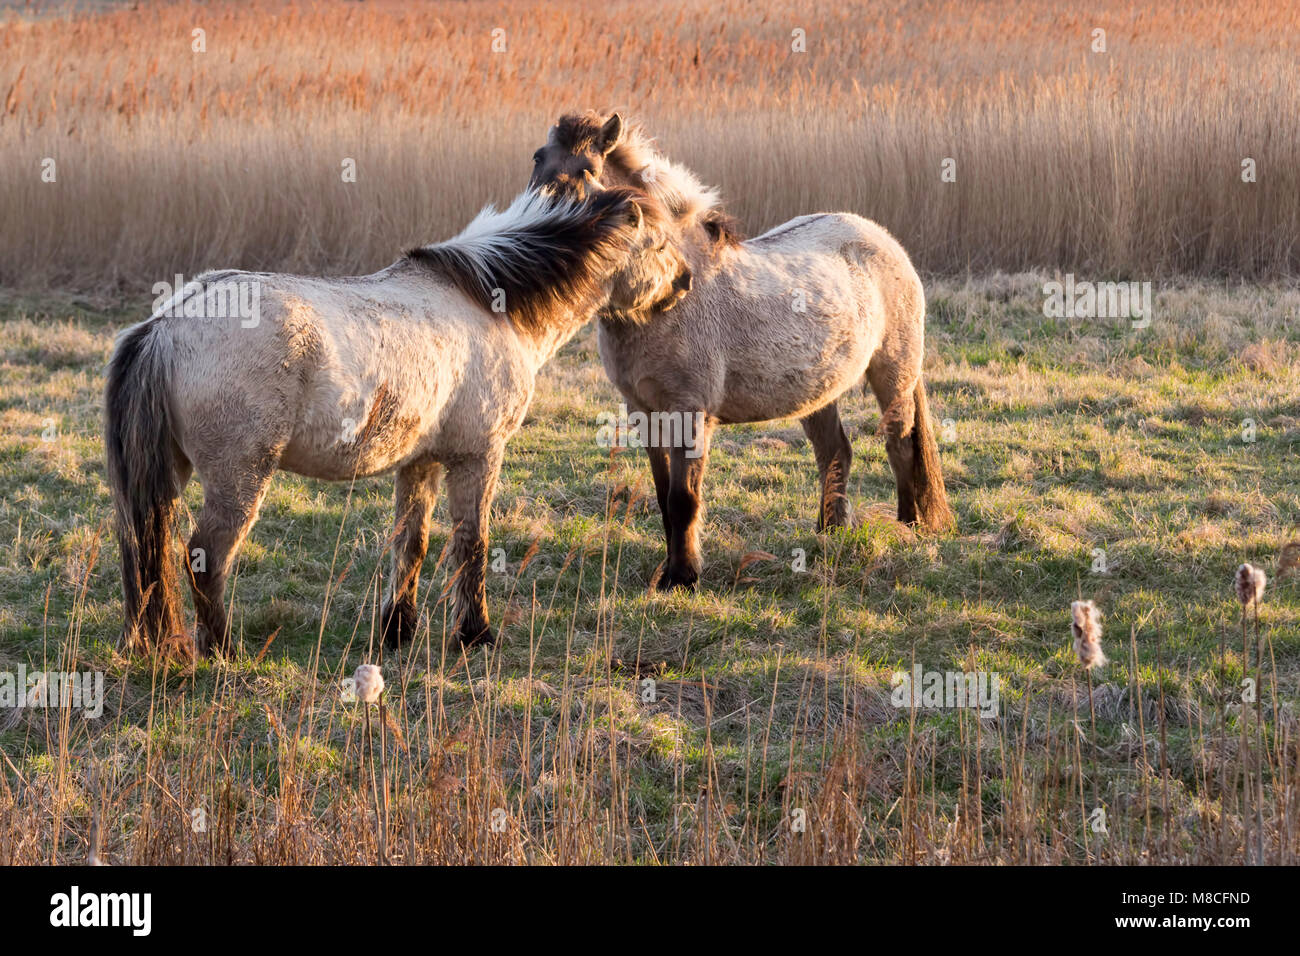 Two Konik horses nuzzling each other at Oare Marsh Nature Reserve in golden light, early Spring. Oare, Faversham, Kent, UK. Stock Photo